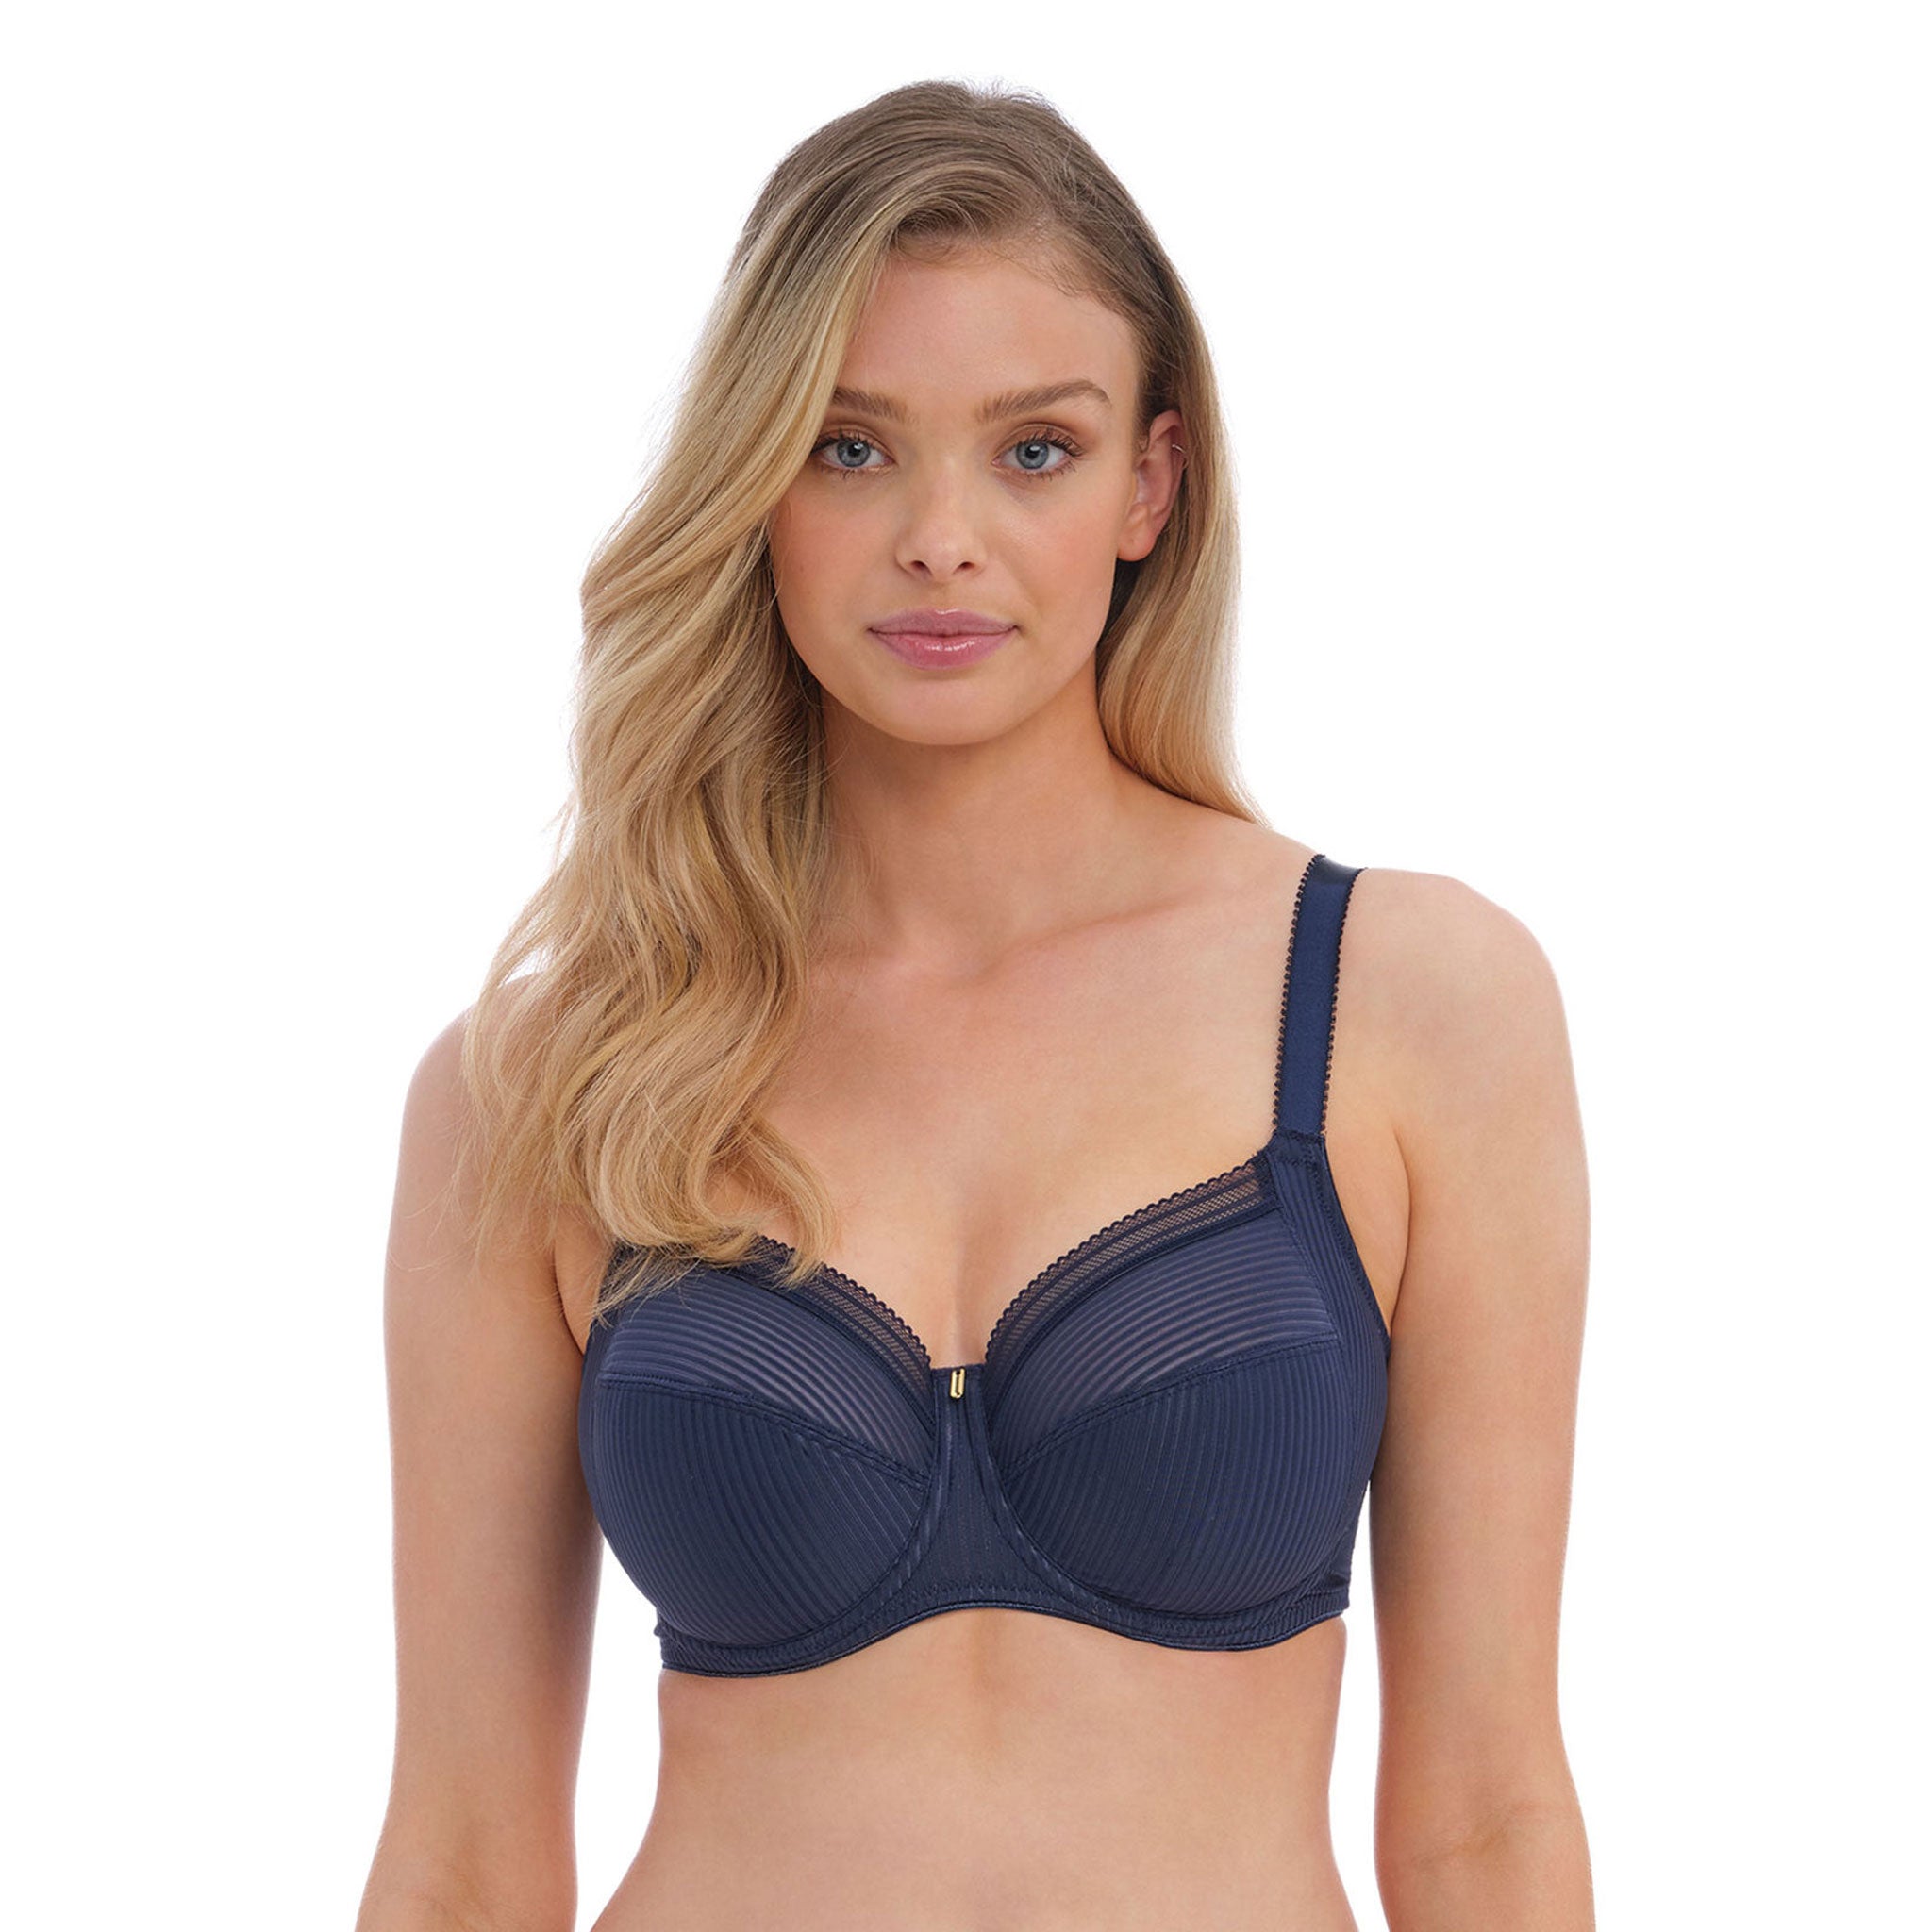 Fusion Full Cup bra by Fantasie in Navy – Ordinarily Active